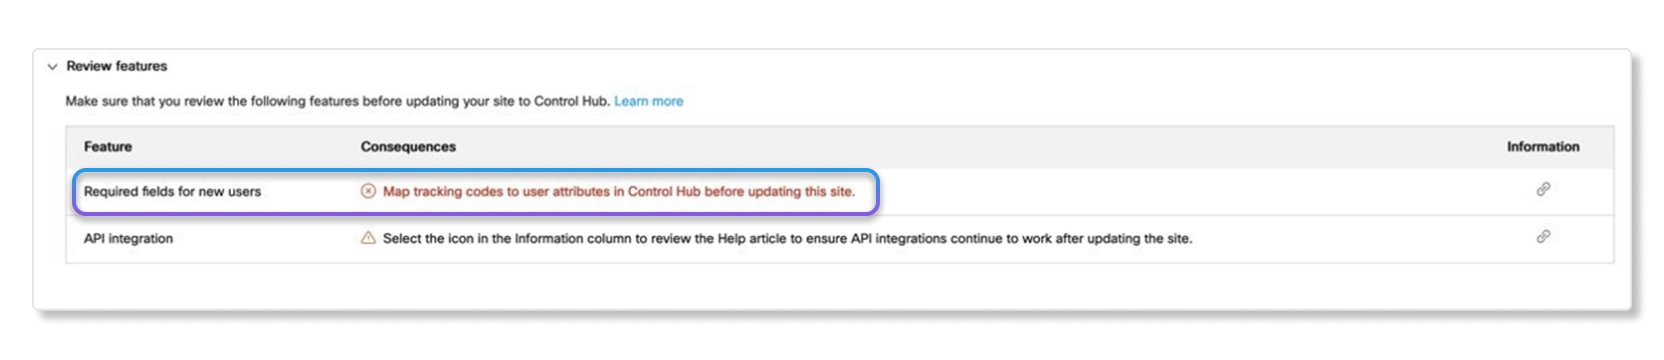 Review features screen when updating site in Site Admin to Control Hub